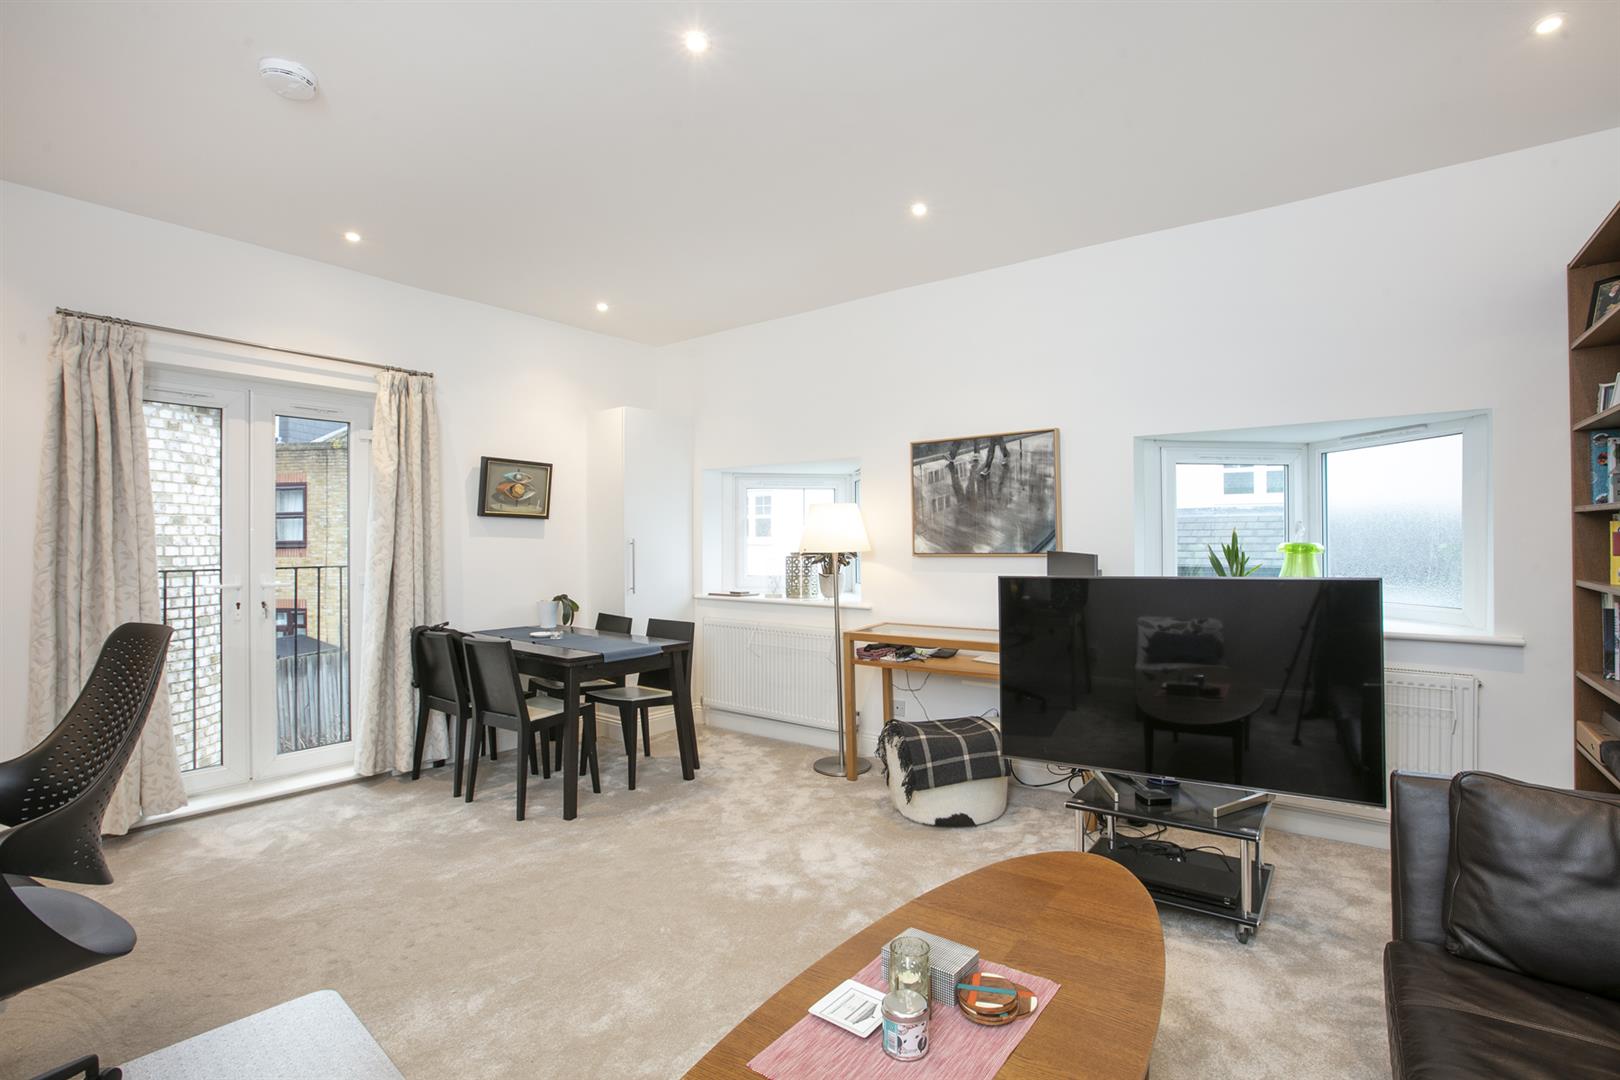 Flat/Apartment For Sale in Coleman Road, Camberwell, SE5 908 view3